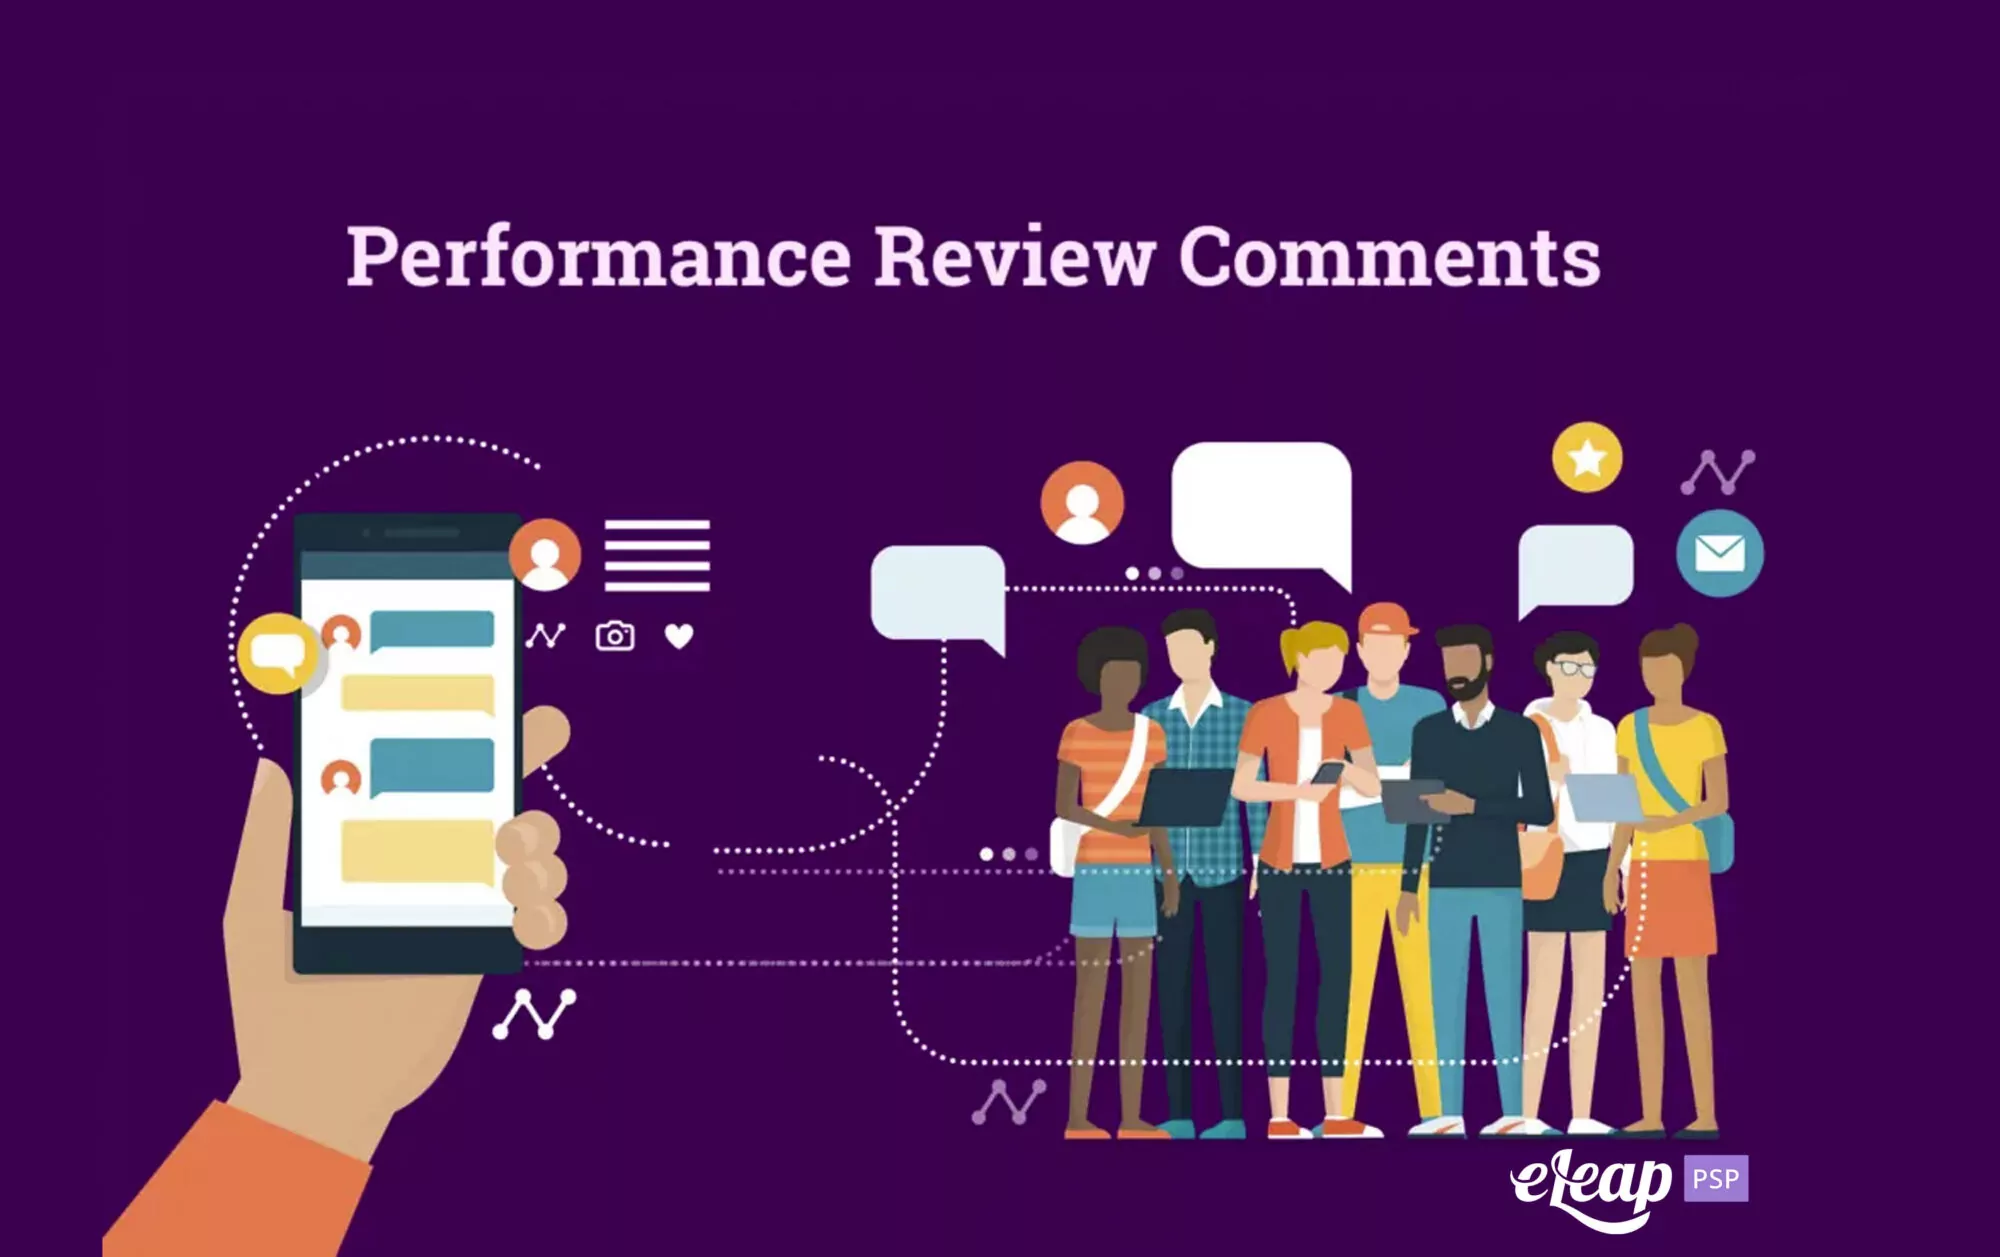 Performance Review Comments